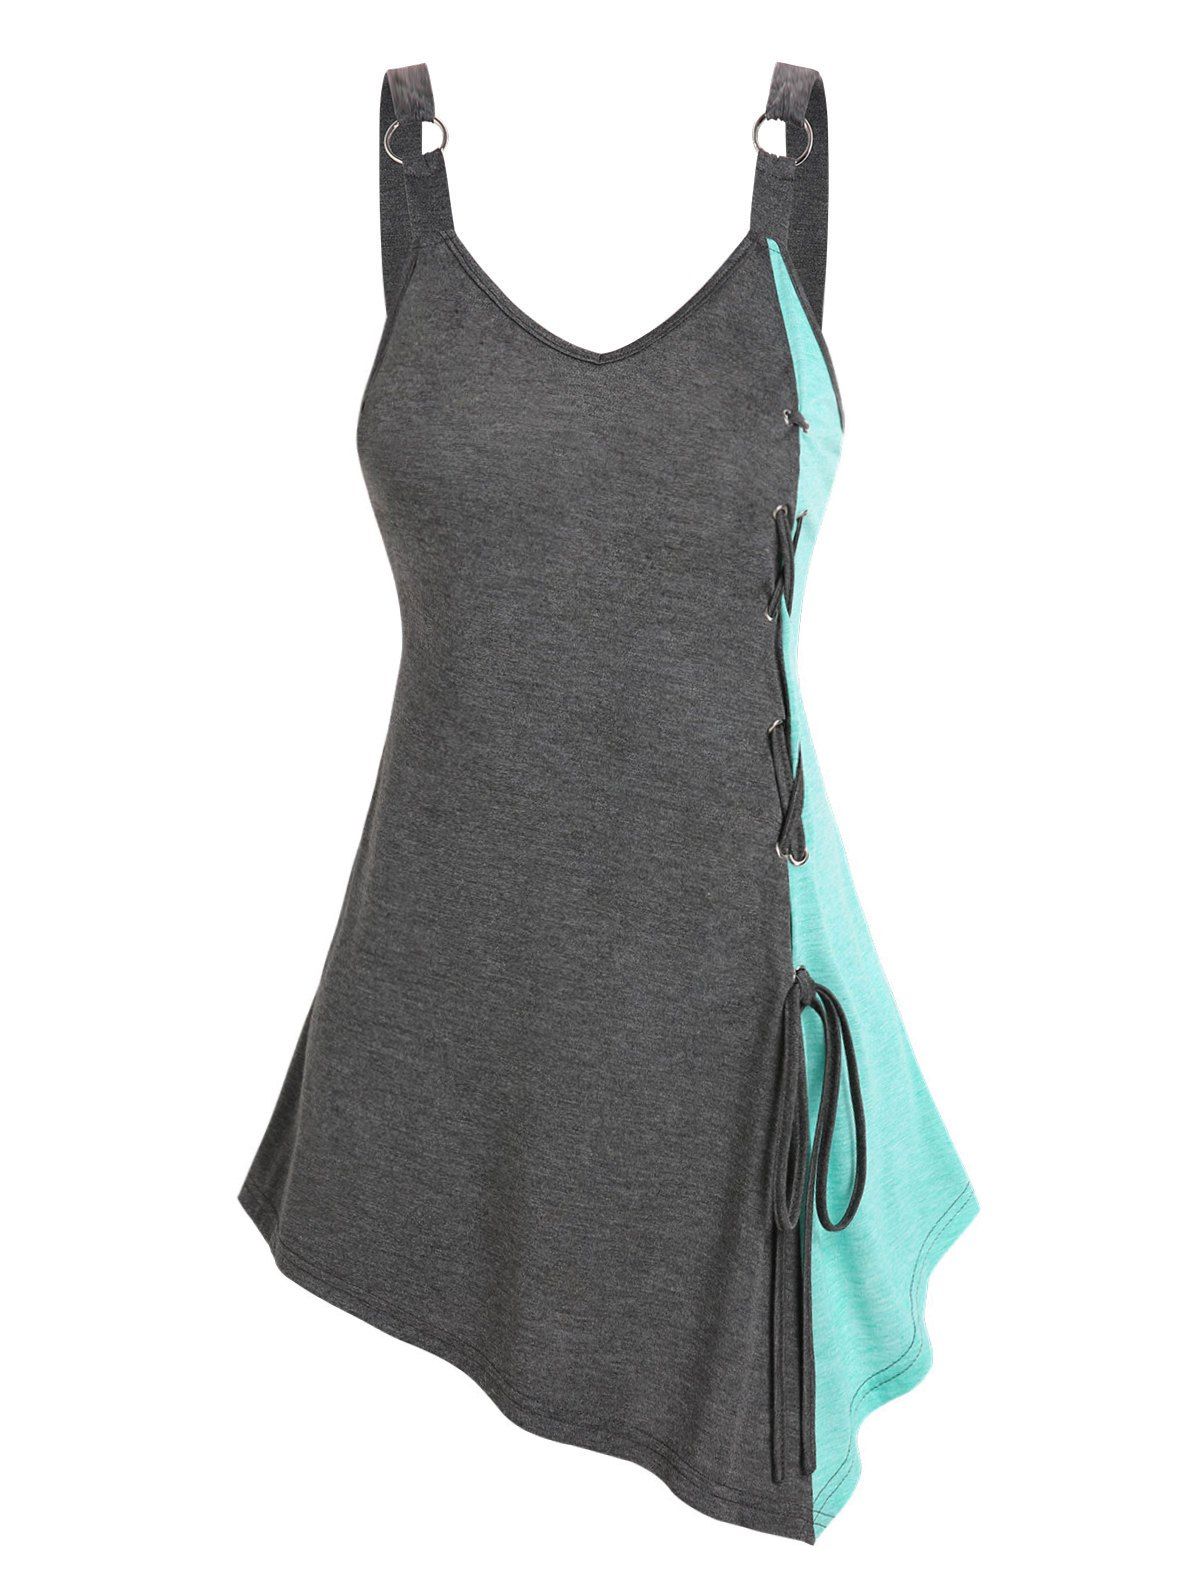 Lace Up O-ring Two Tone Tunic Tank Top - DARK GRAY M